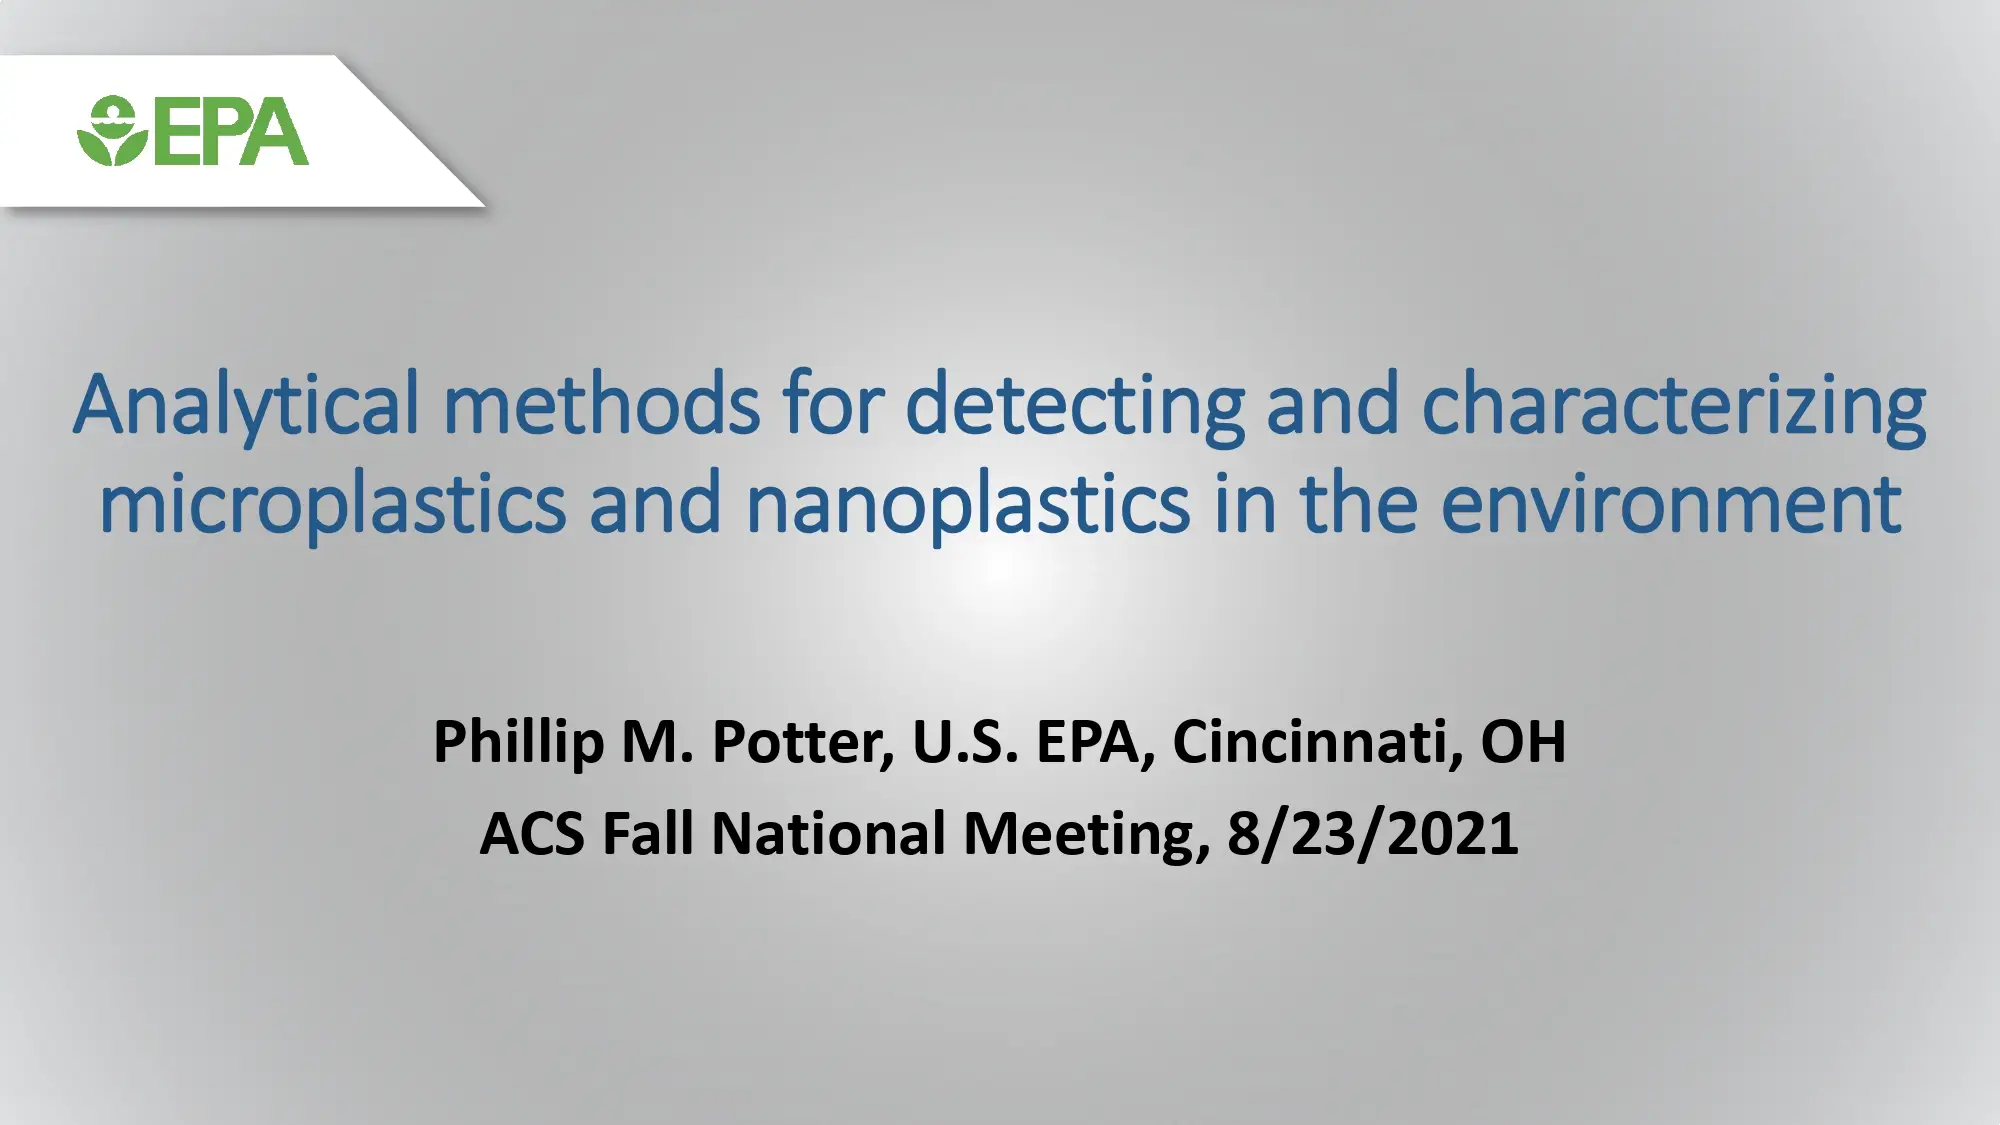 Analytical Methods For Detecting And Characterizing Microplastics And Nanoplastics In The Environment